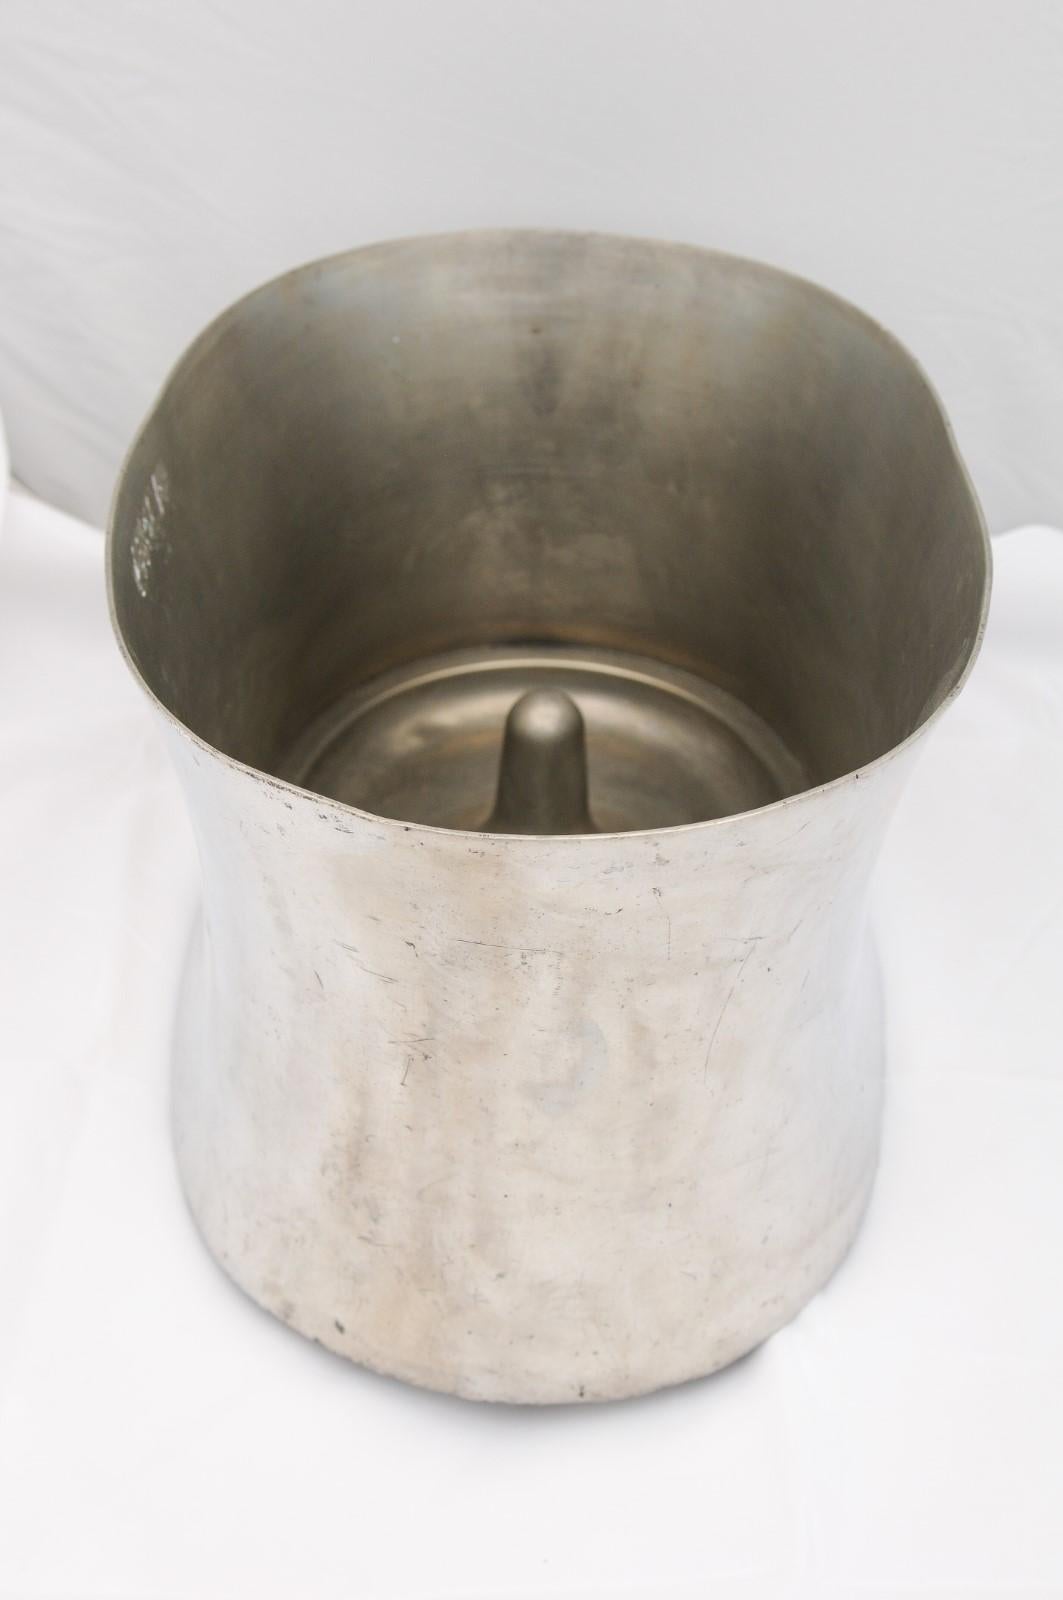 A Royal Selangor Dom Pérignon pewter double champagne bucket from the mid 20th century. Commissioned by some of the most prestigious luxury companies, including LVMH (Louis Vuitton Moët Hennessy) to produce champagne accessories for their brands